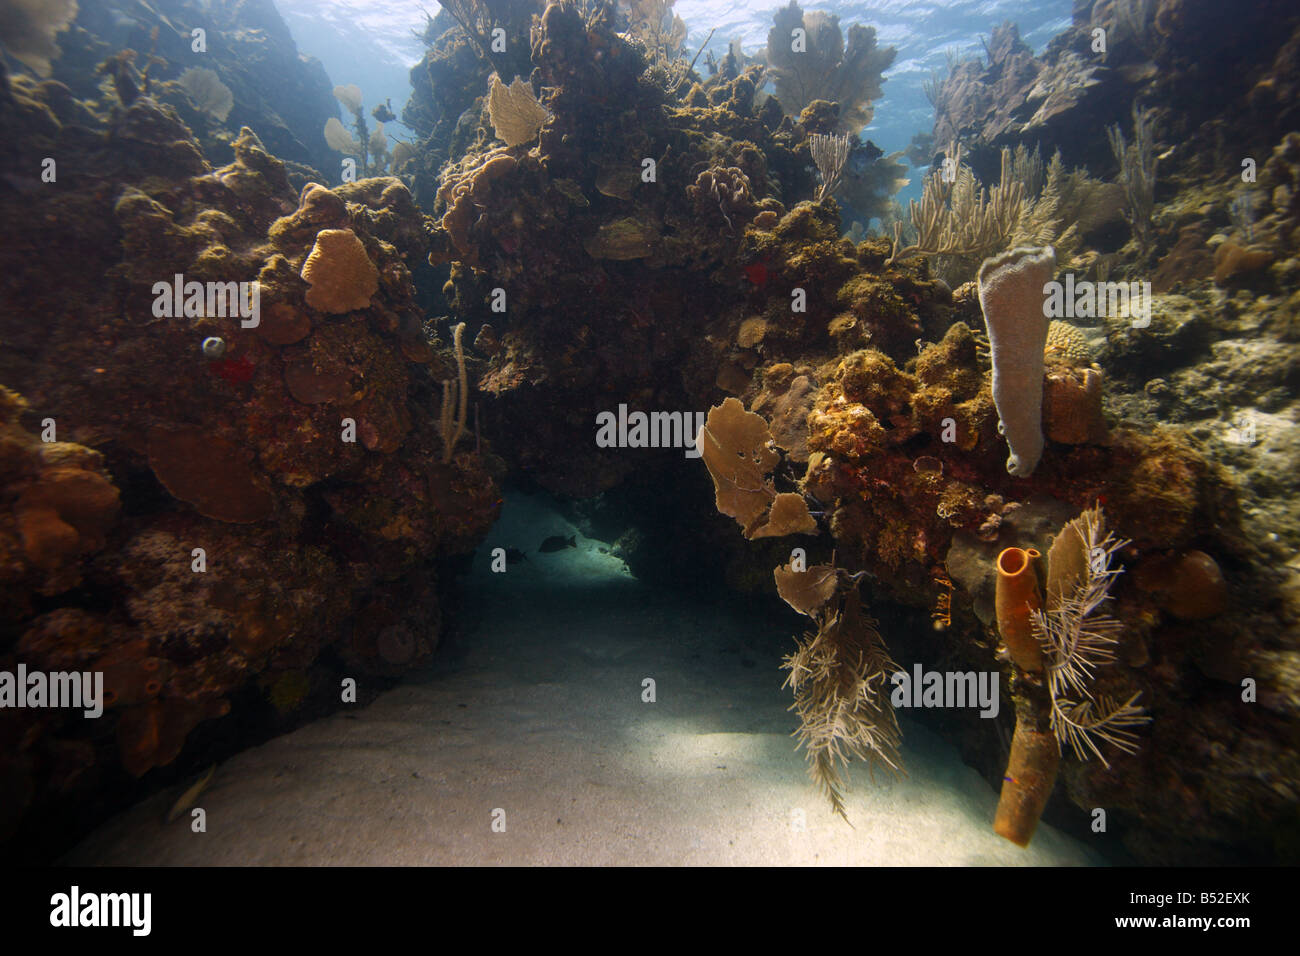 Underwater coral reef scene with cave Stock Photo